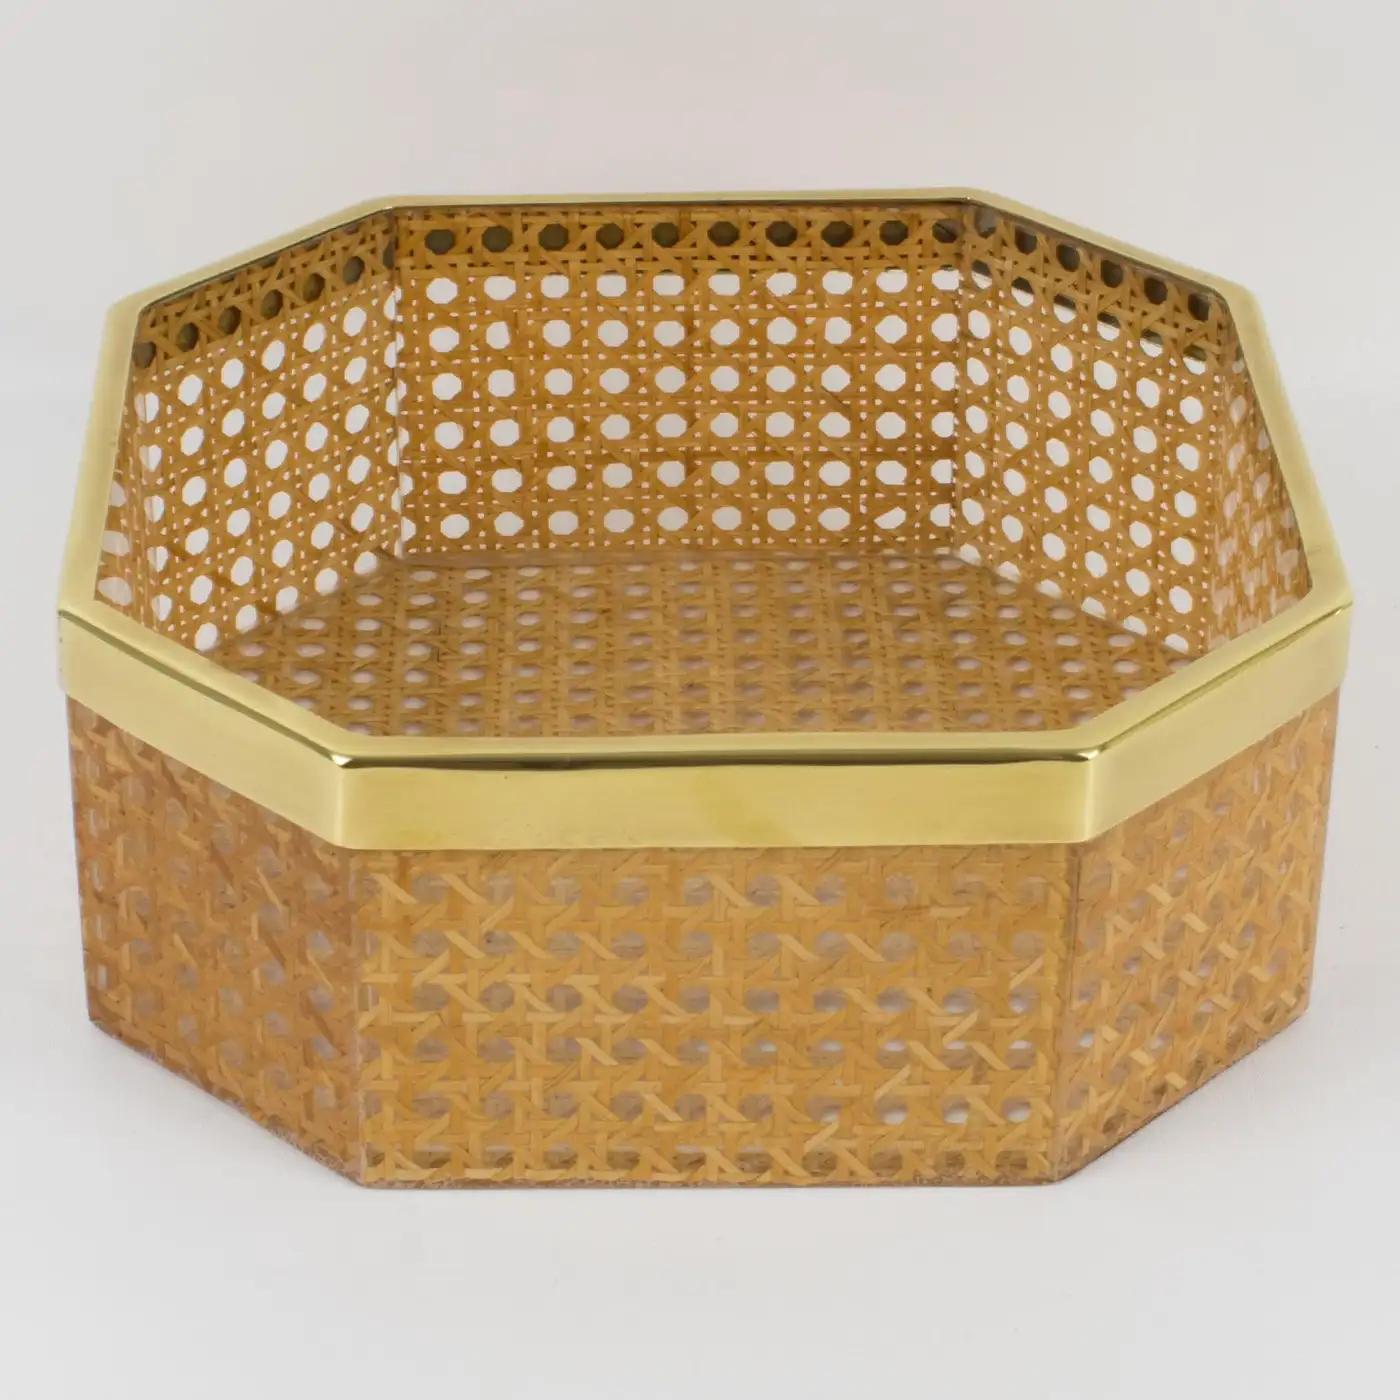 French Christian Dior Home Lucite and Rattan Basket Bowl Centerpiece, 1970s For Sale